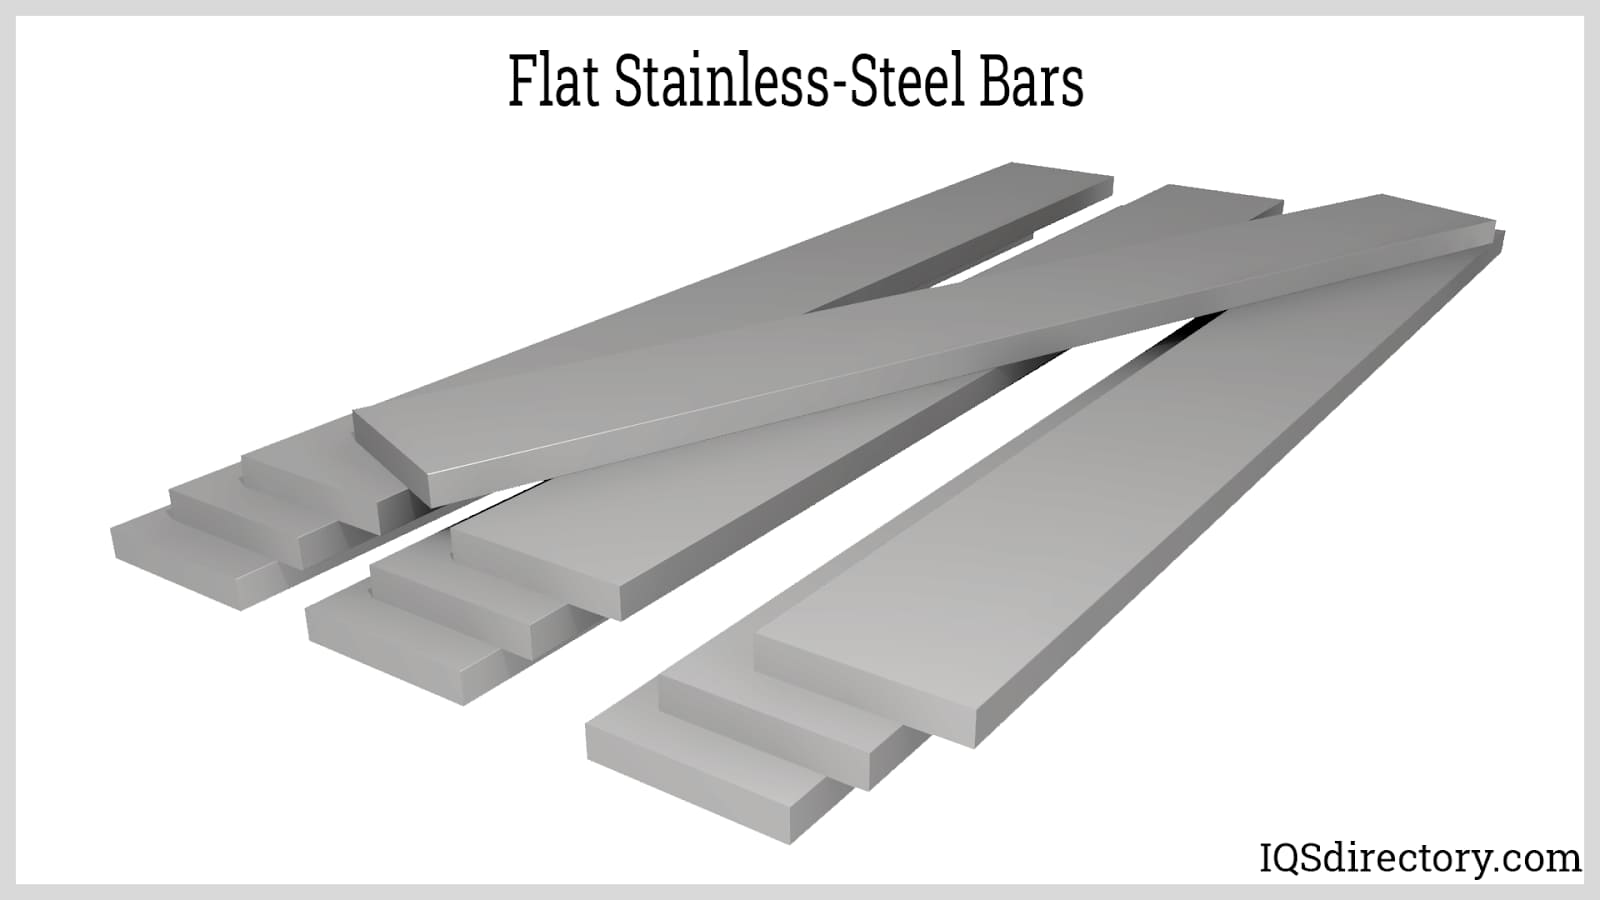 Flat Stainless-Steel Bars